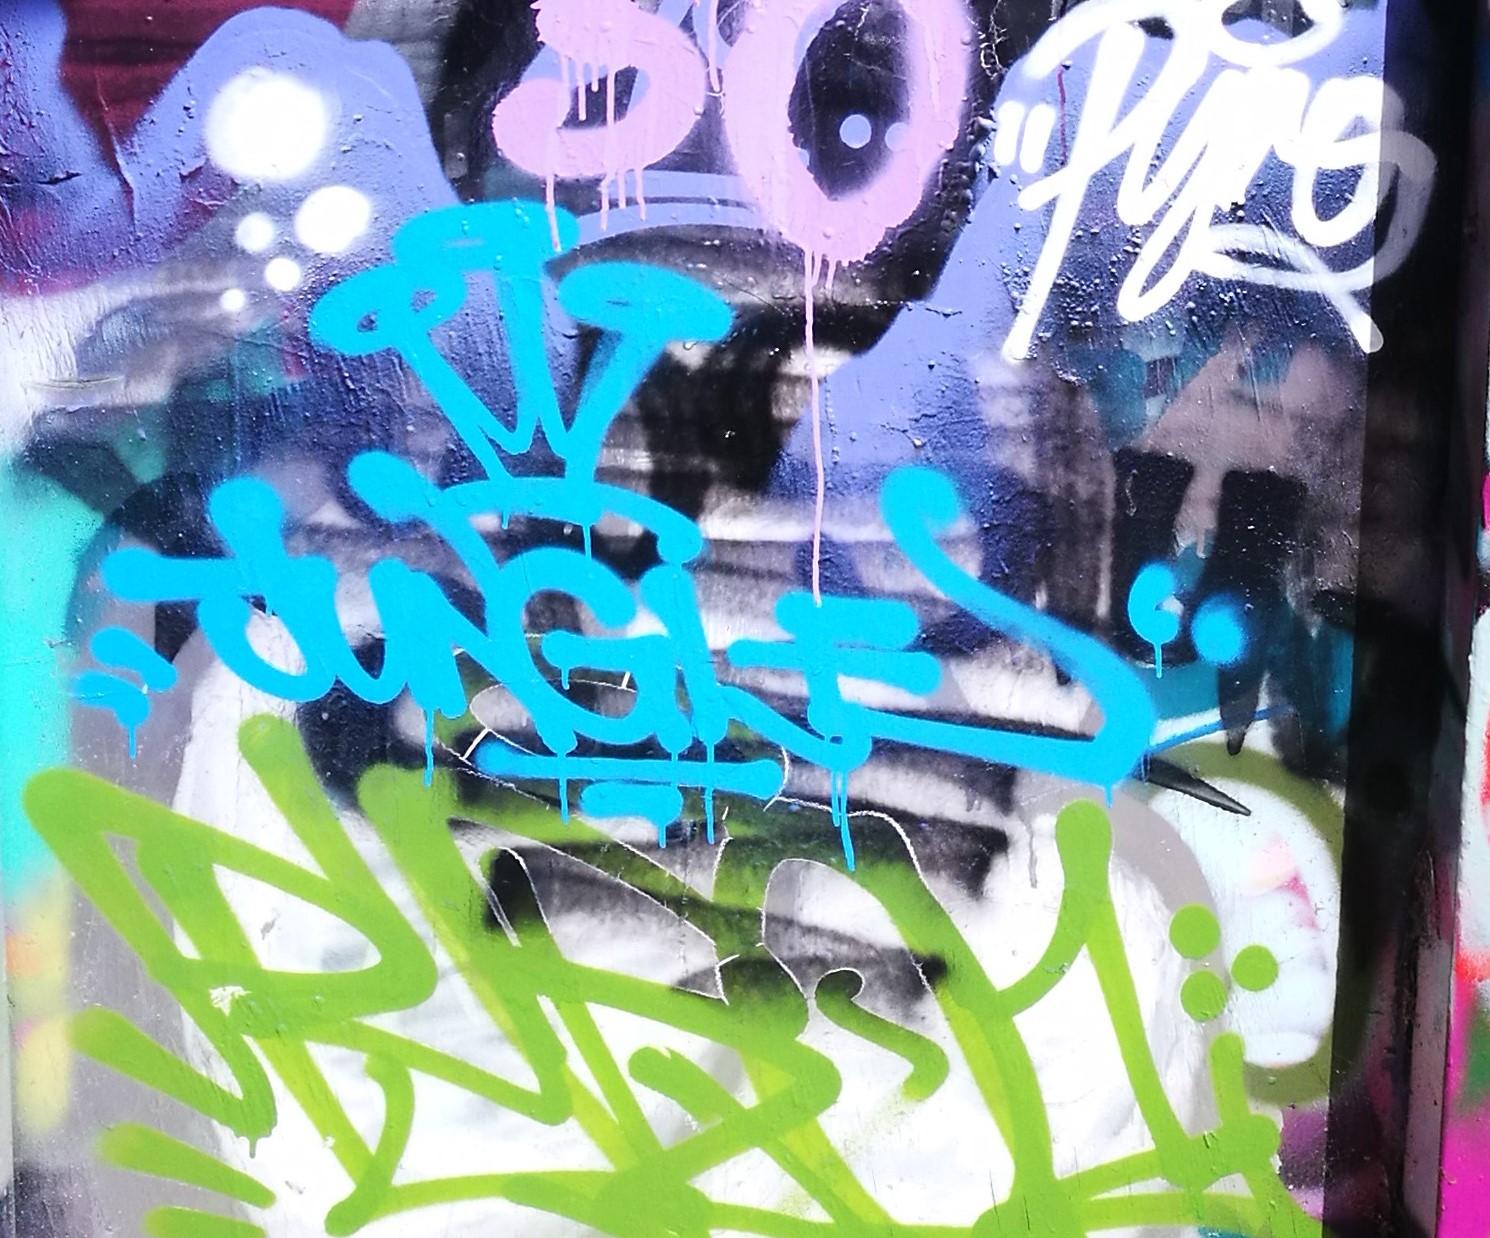 A tag paying tribute to Jungle in Christchurch, 2019.